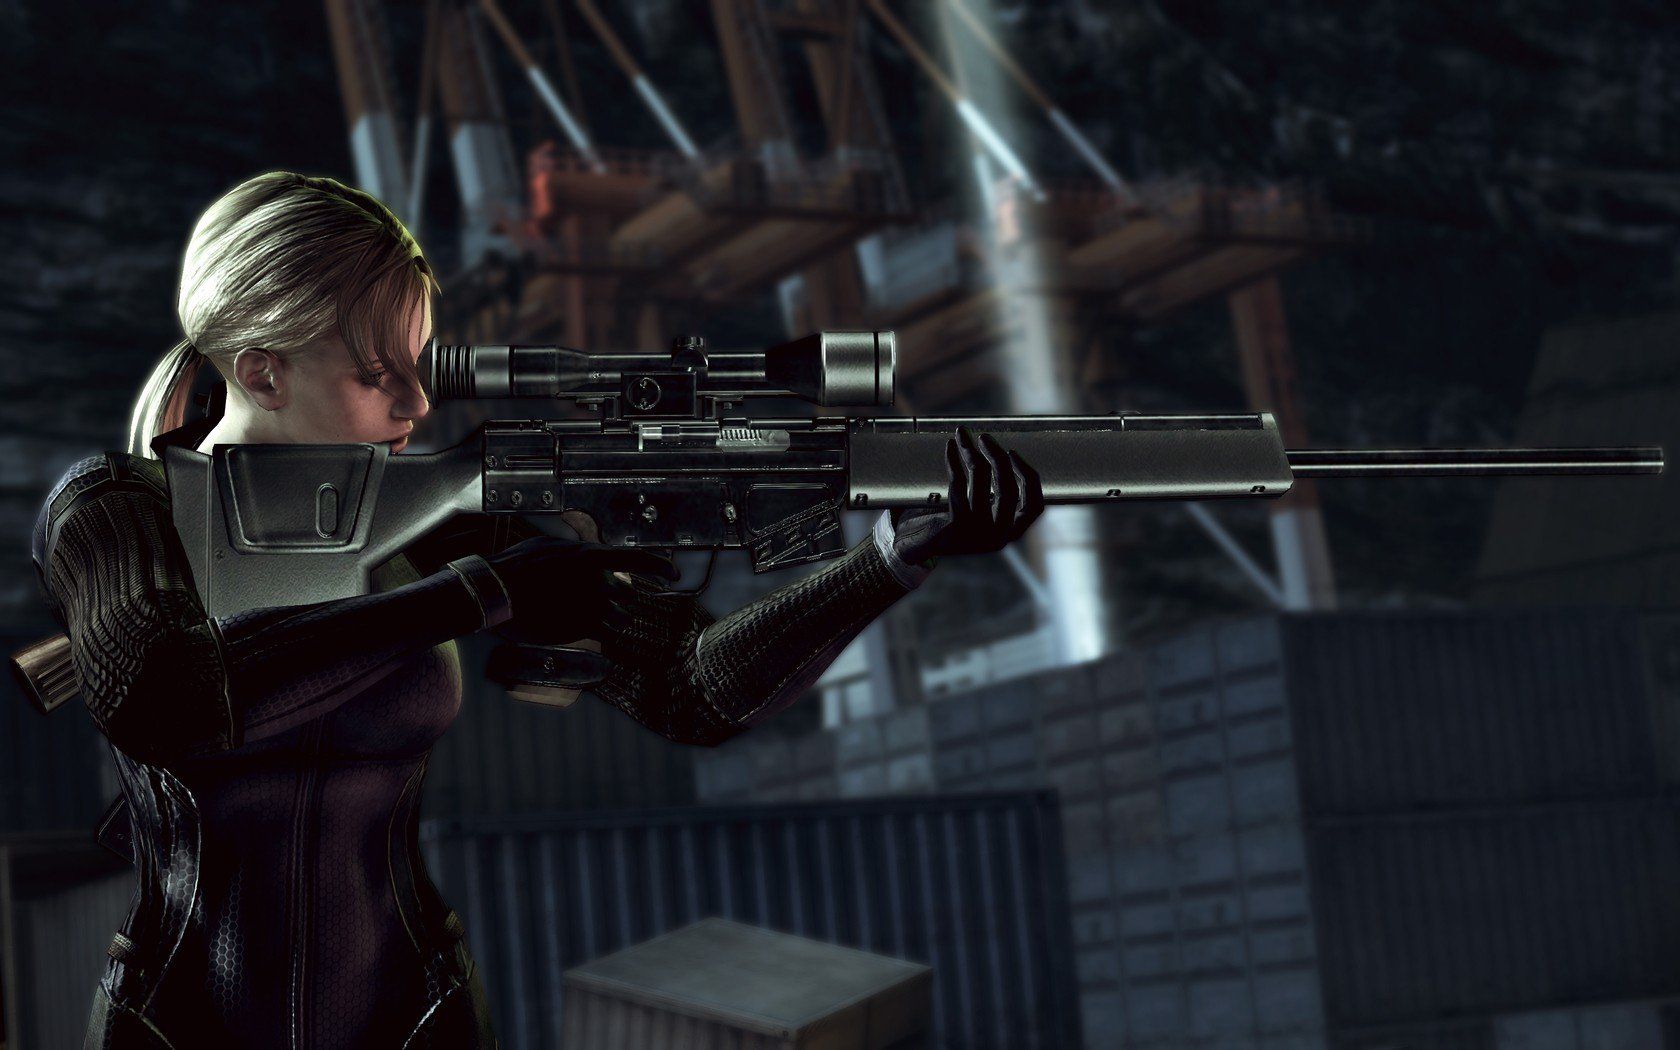 Blondes women video games snipers weapons girls with guns Jill